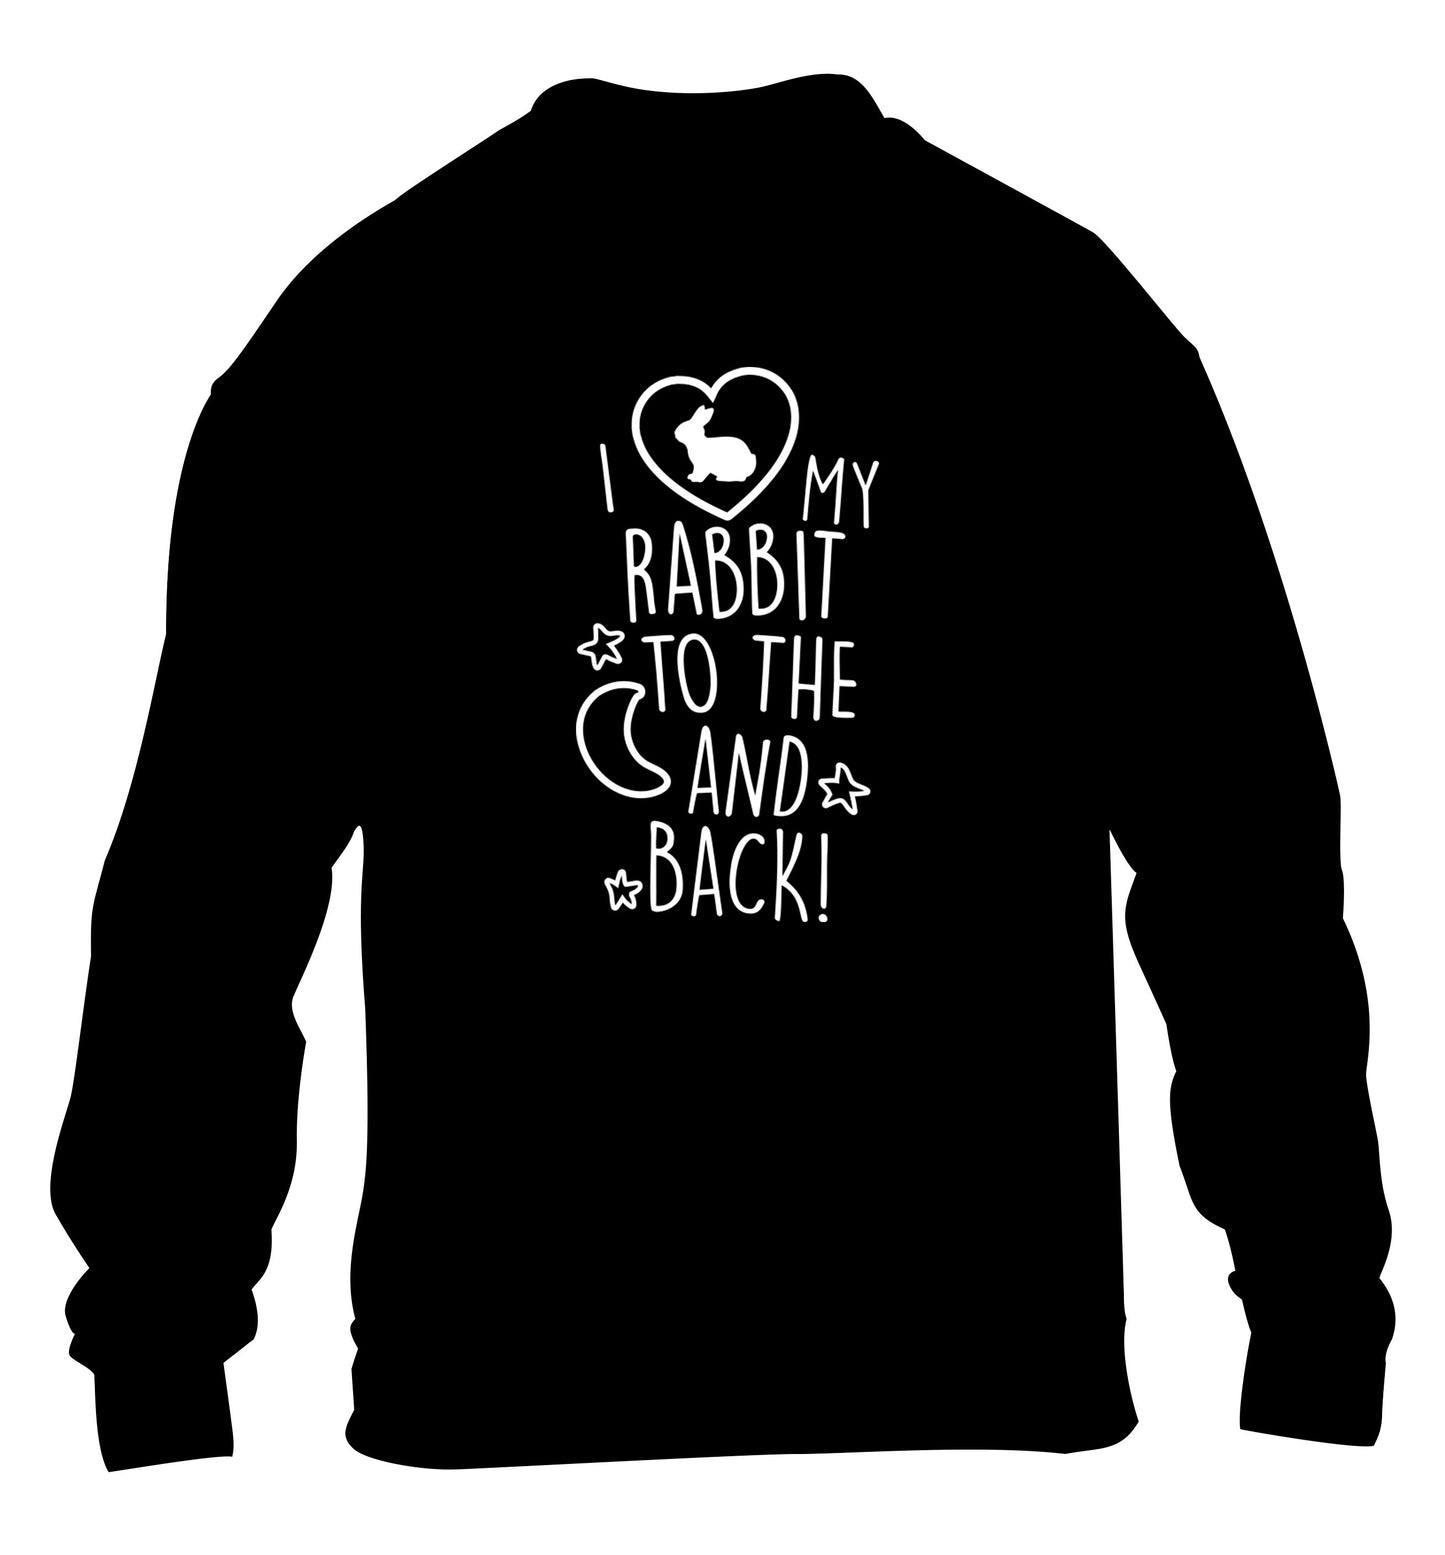 I love my rabbit to the moon and back children's black  sweater 12-14 Years